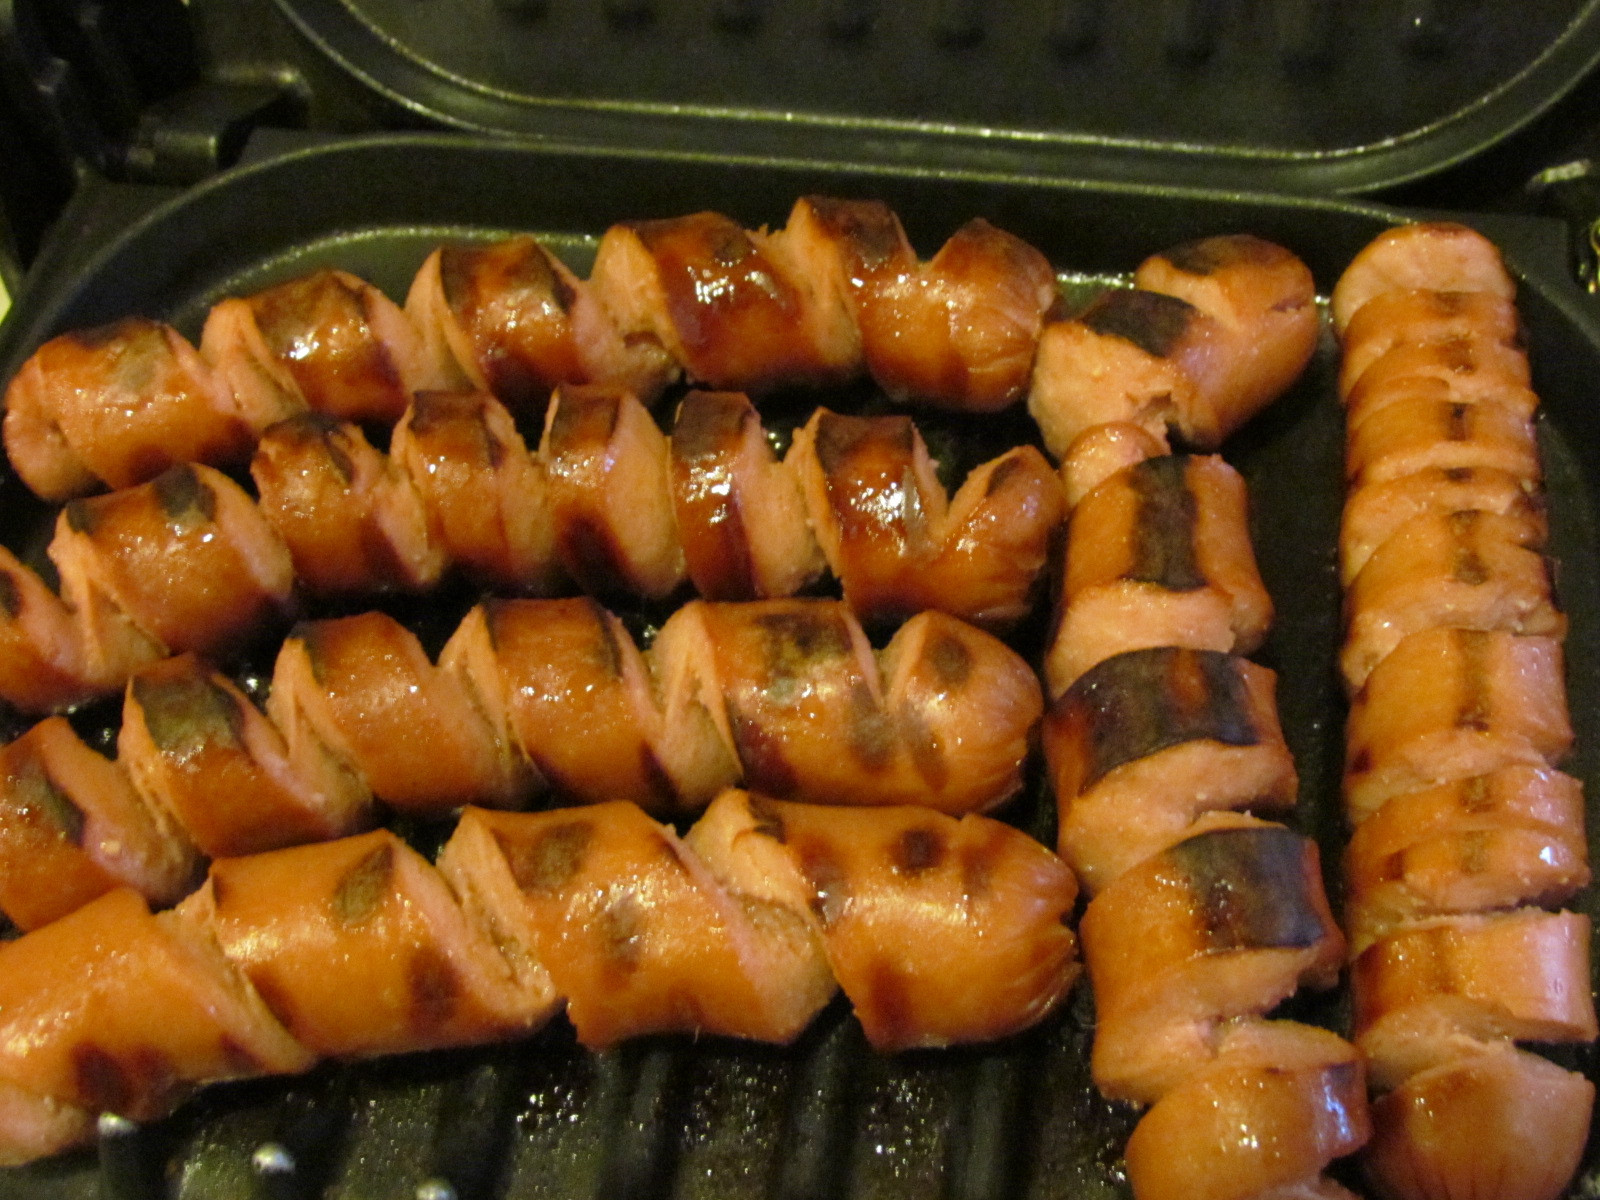 George Foreman Grill Hot Dogs
 Spiral Hot Dogs